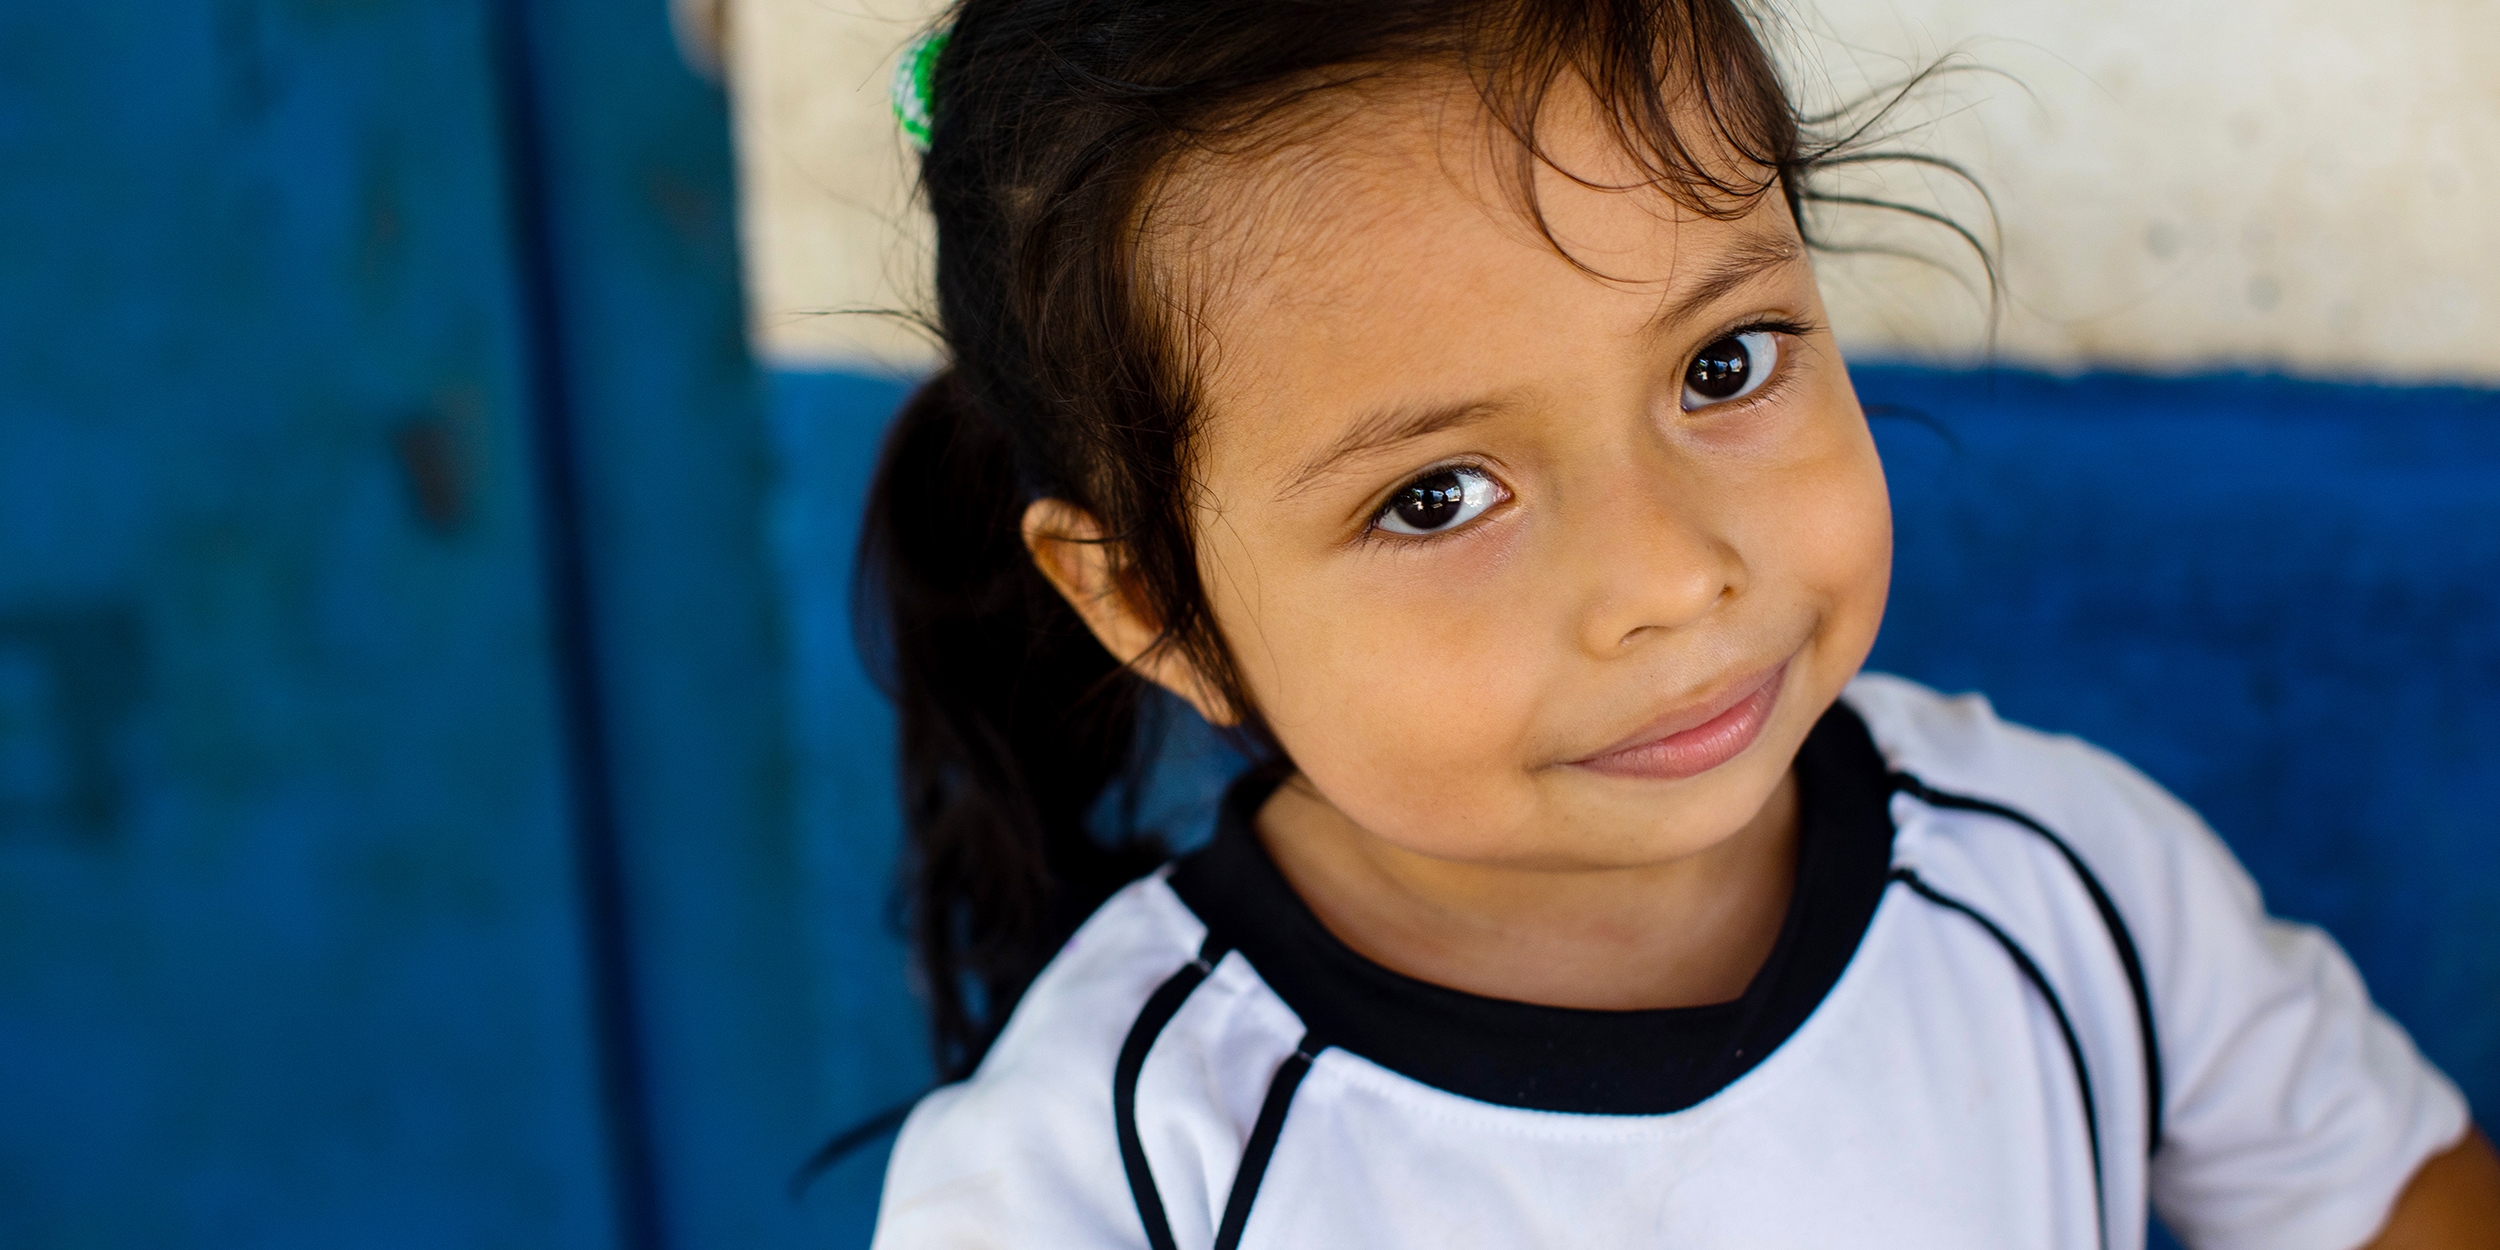 El Salvador, a 4 yr. little girl in the Save the Children sponsorship program smiles at the camera